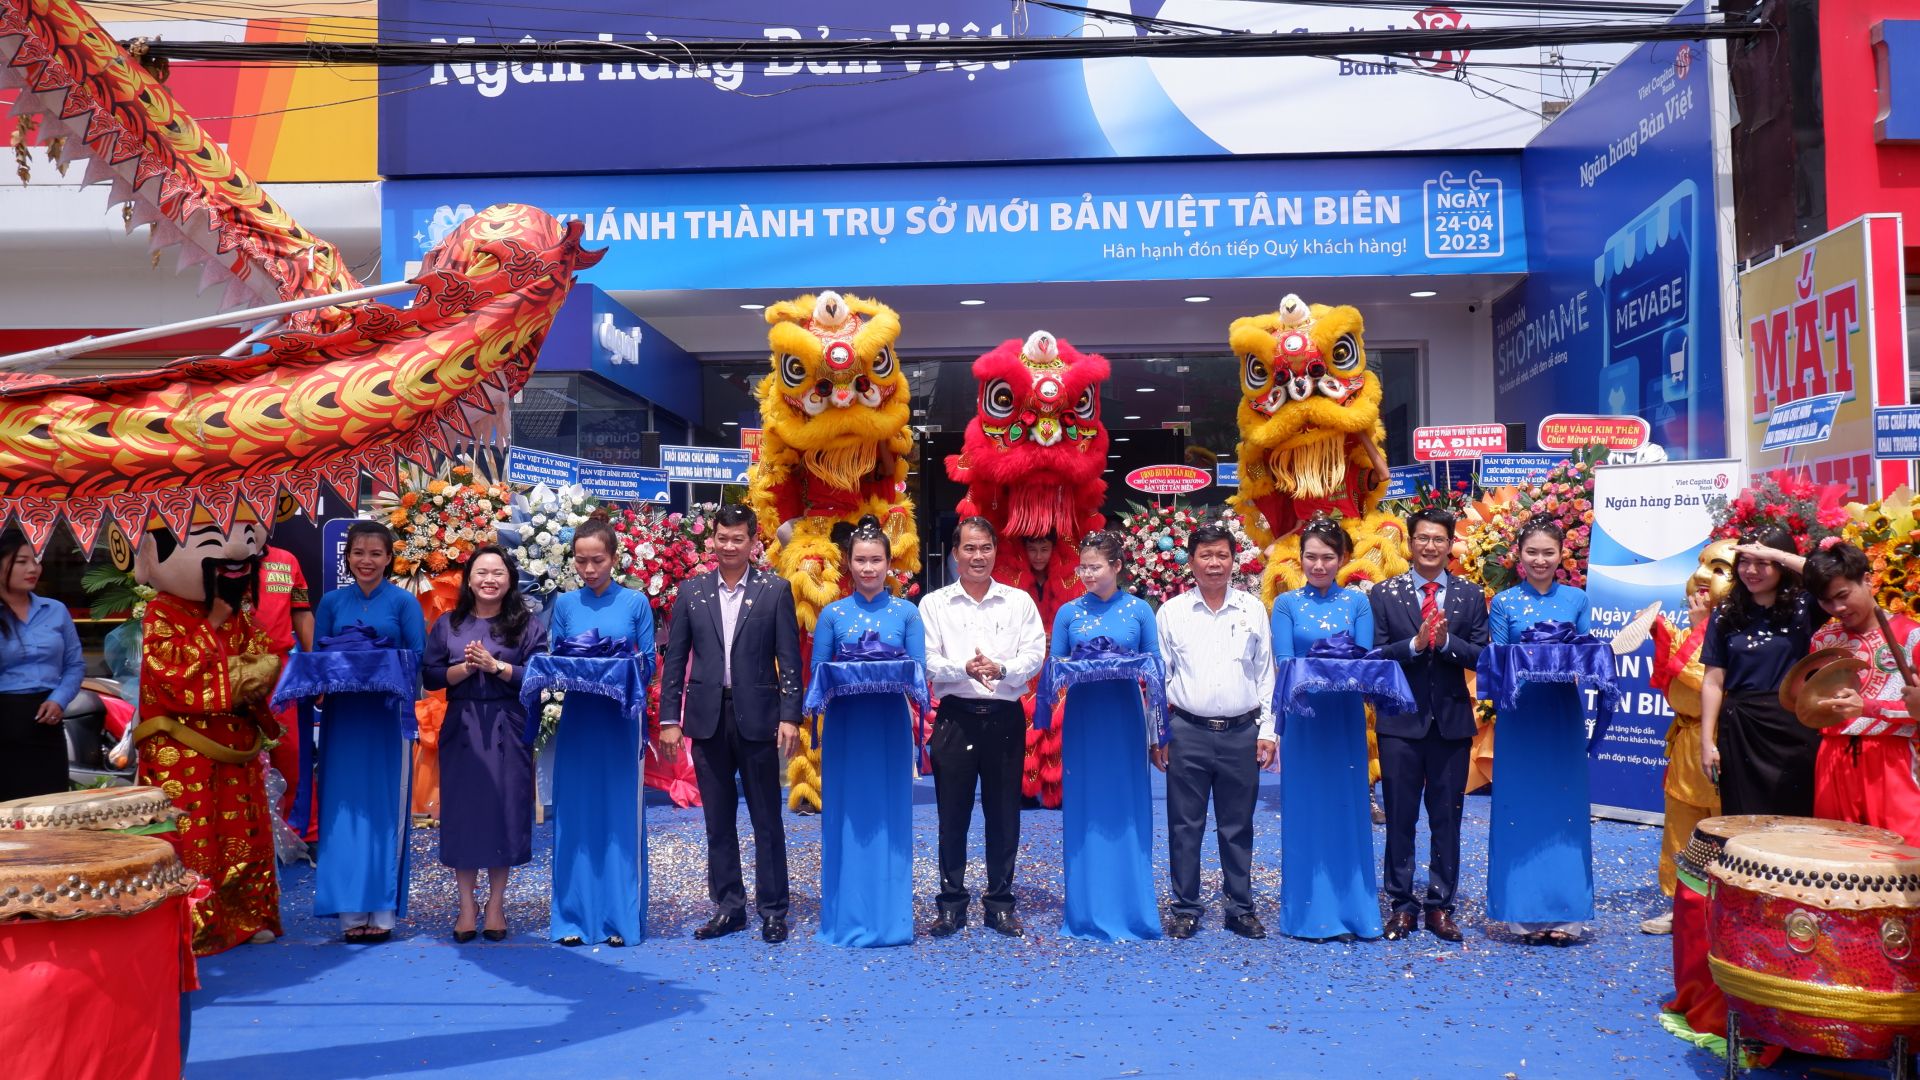 Ban Viet Bank inaugurated its new headquarters - Vietnam.vn